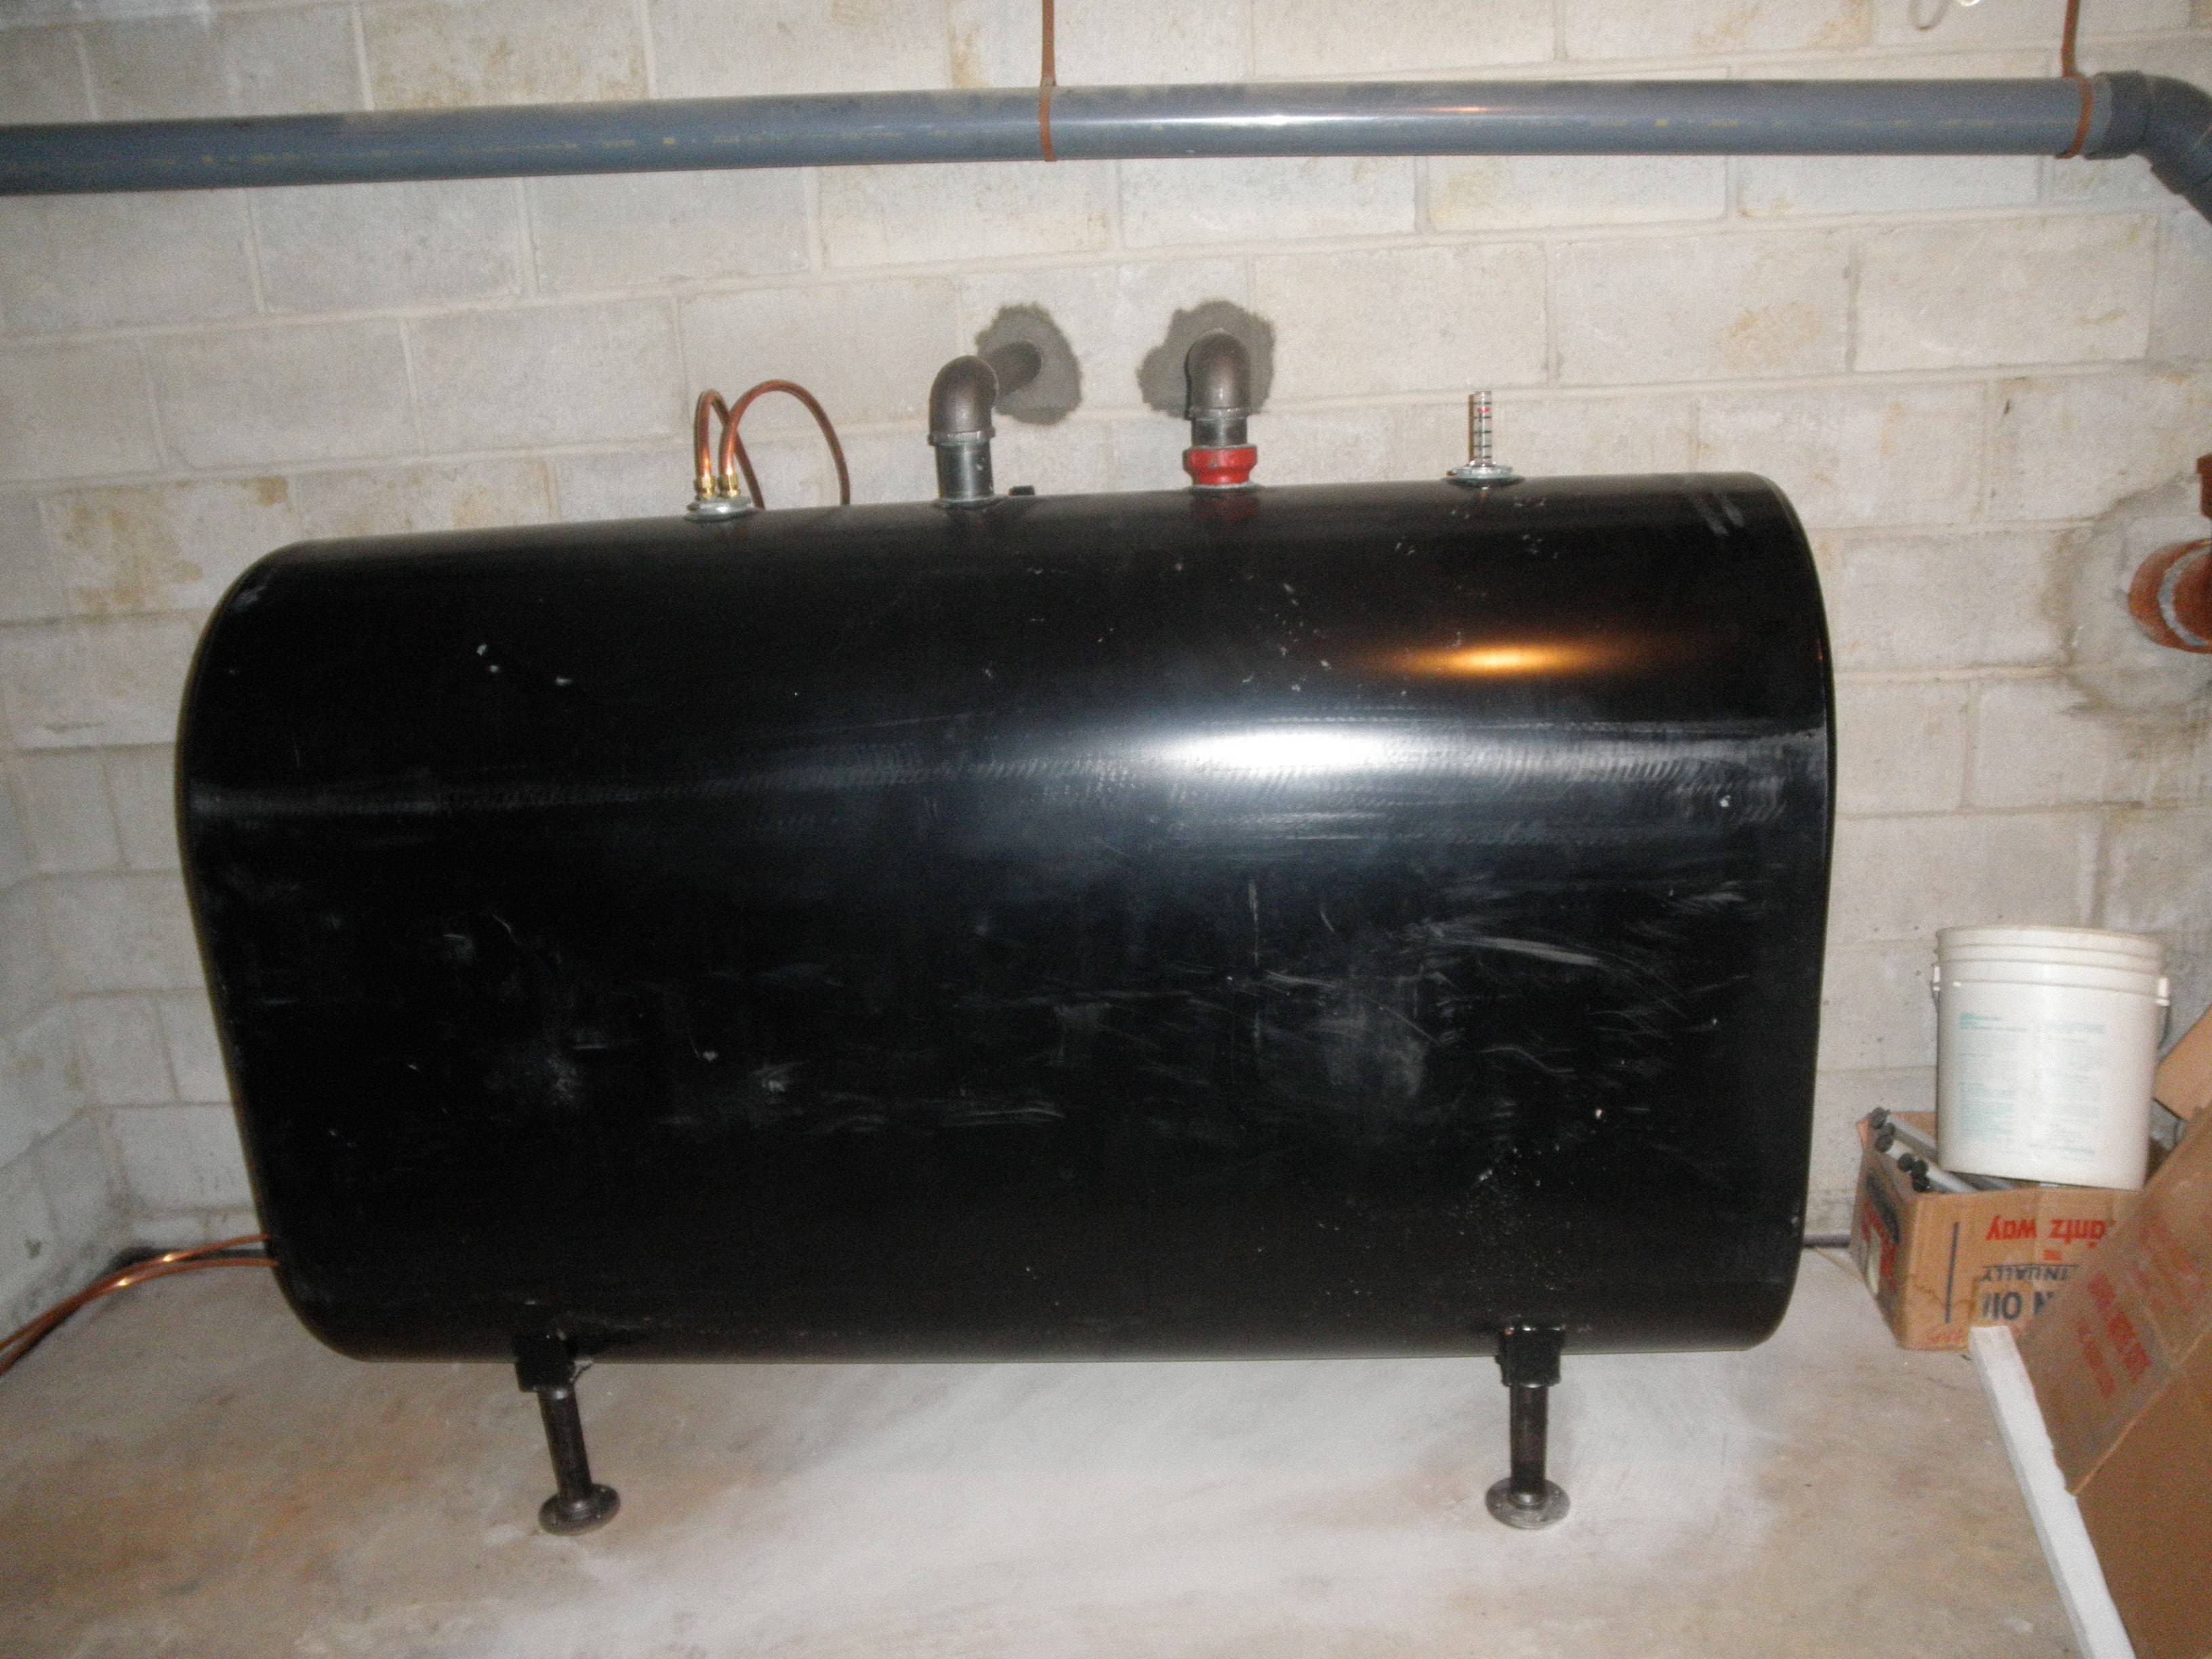 Oil Tank Chart 330 - Barrier Oil Tank Size And Capacity Chart.